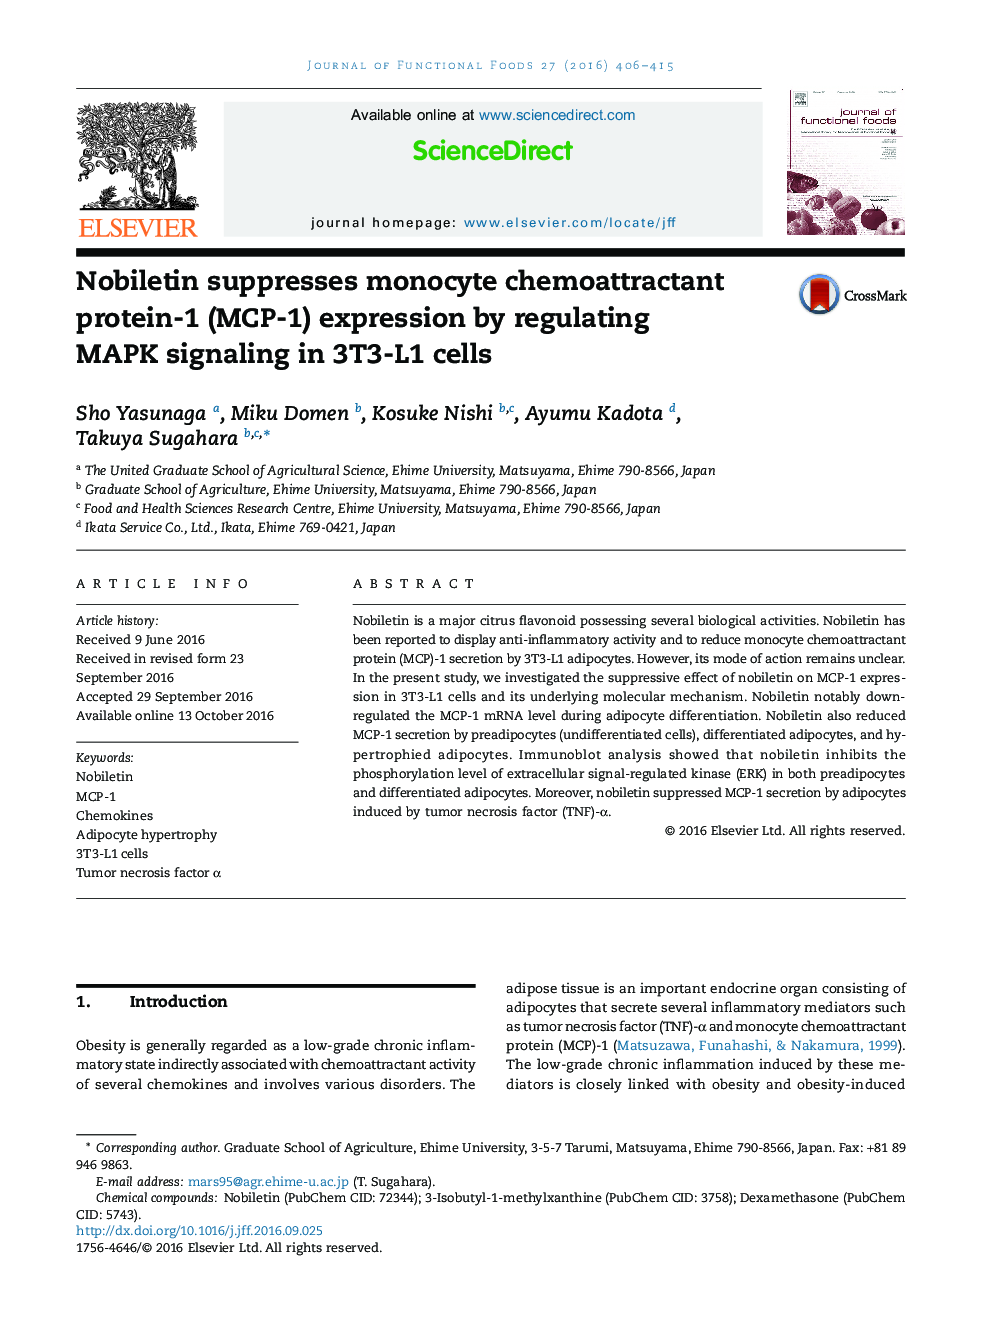 Nobiletin suppresses monocyte chemoattractant protein-1 (MCP-1) expression by regulating MAPK signaling in 3T3-L1 cells